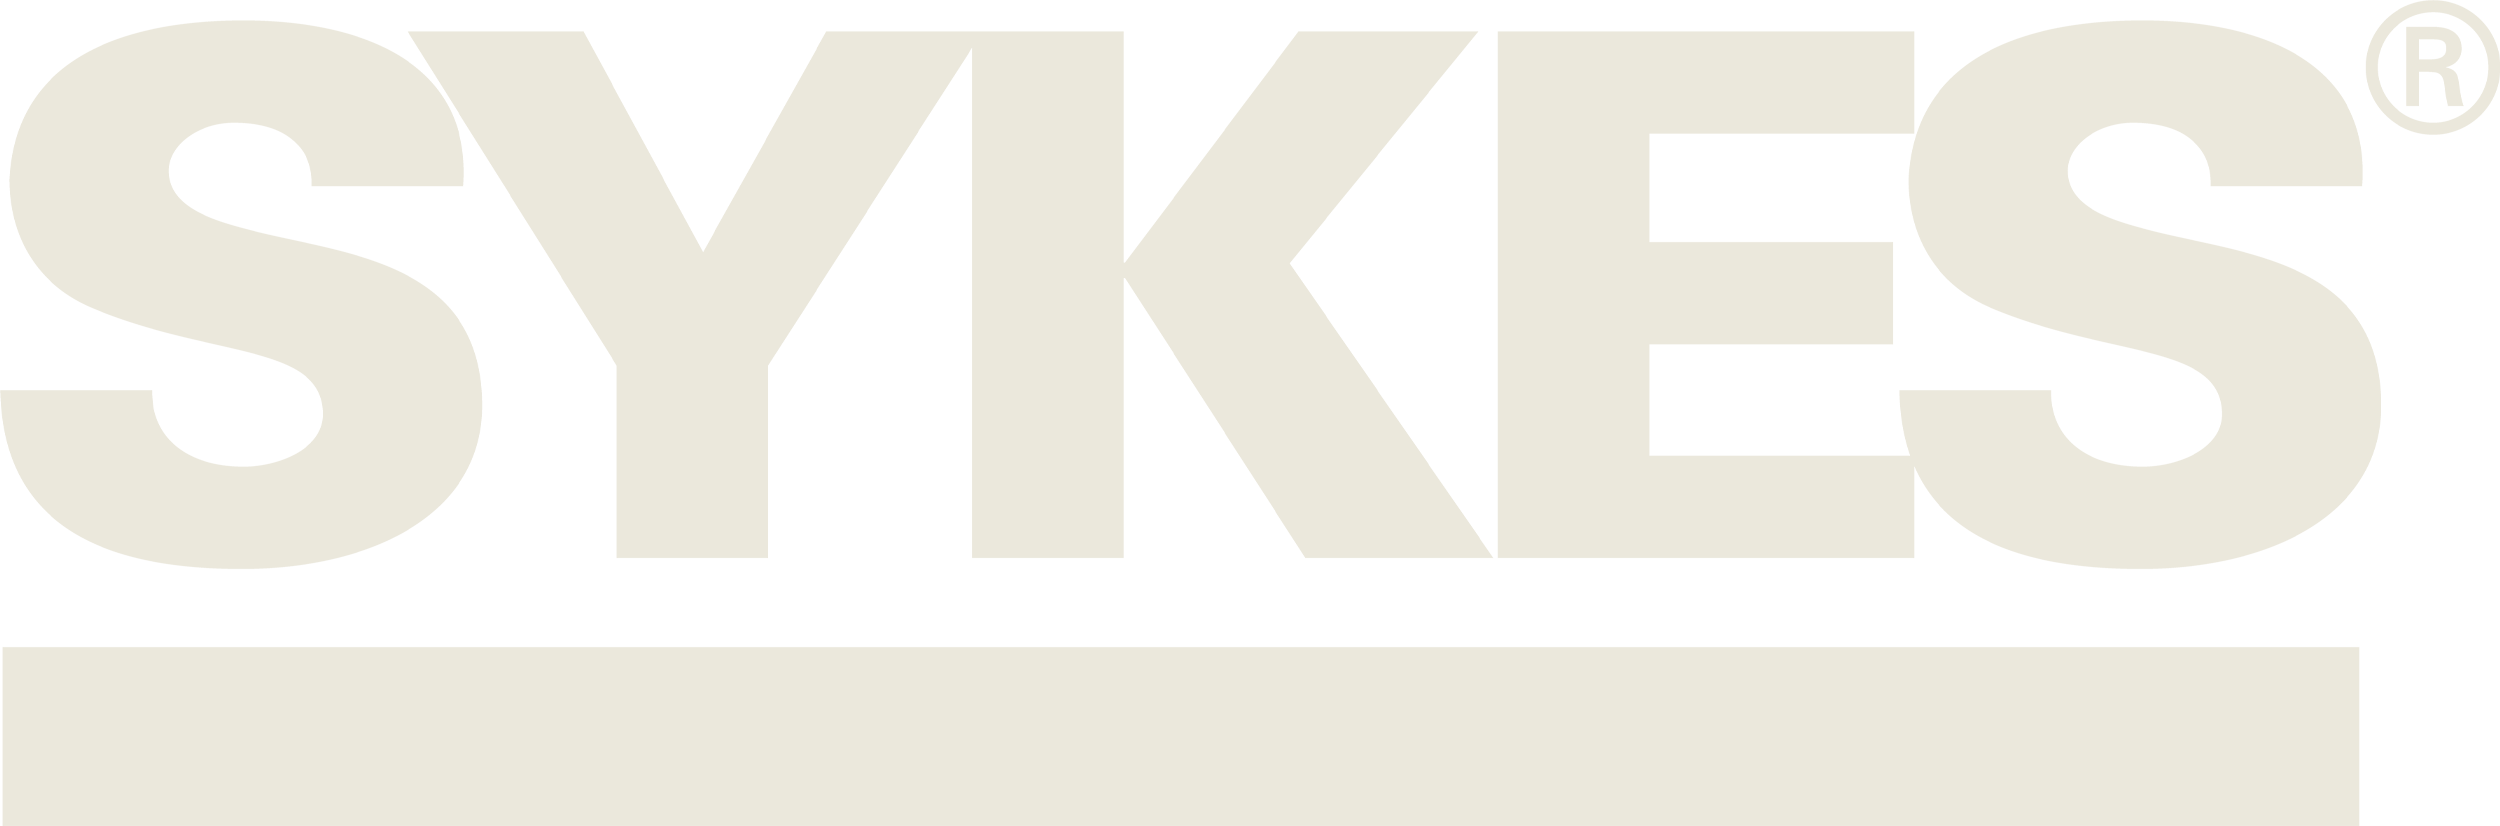 Sykes.png